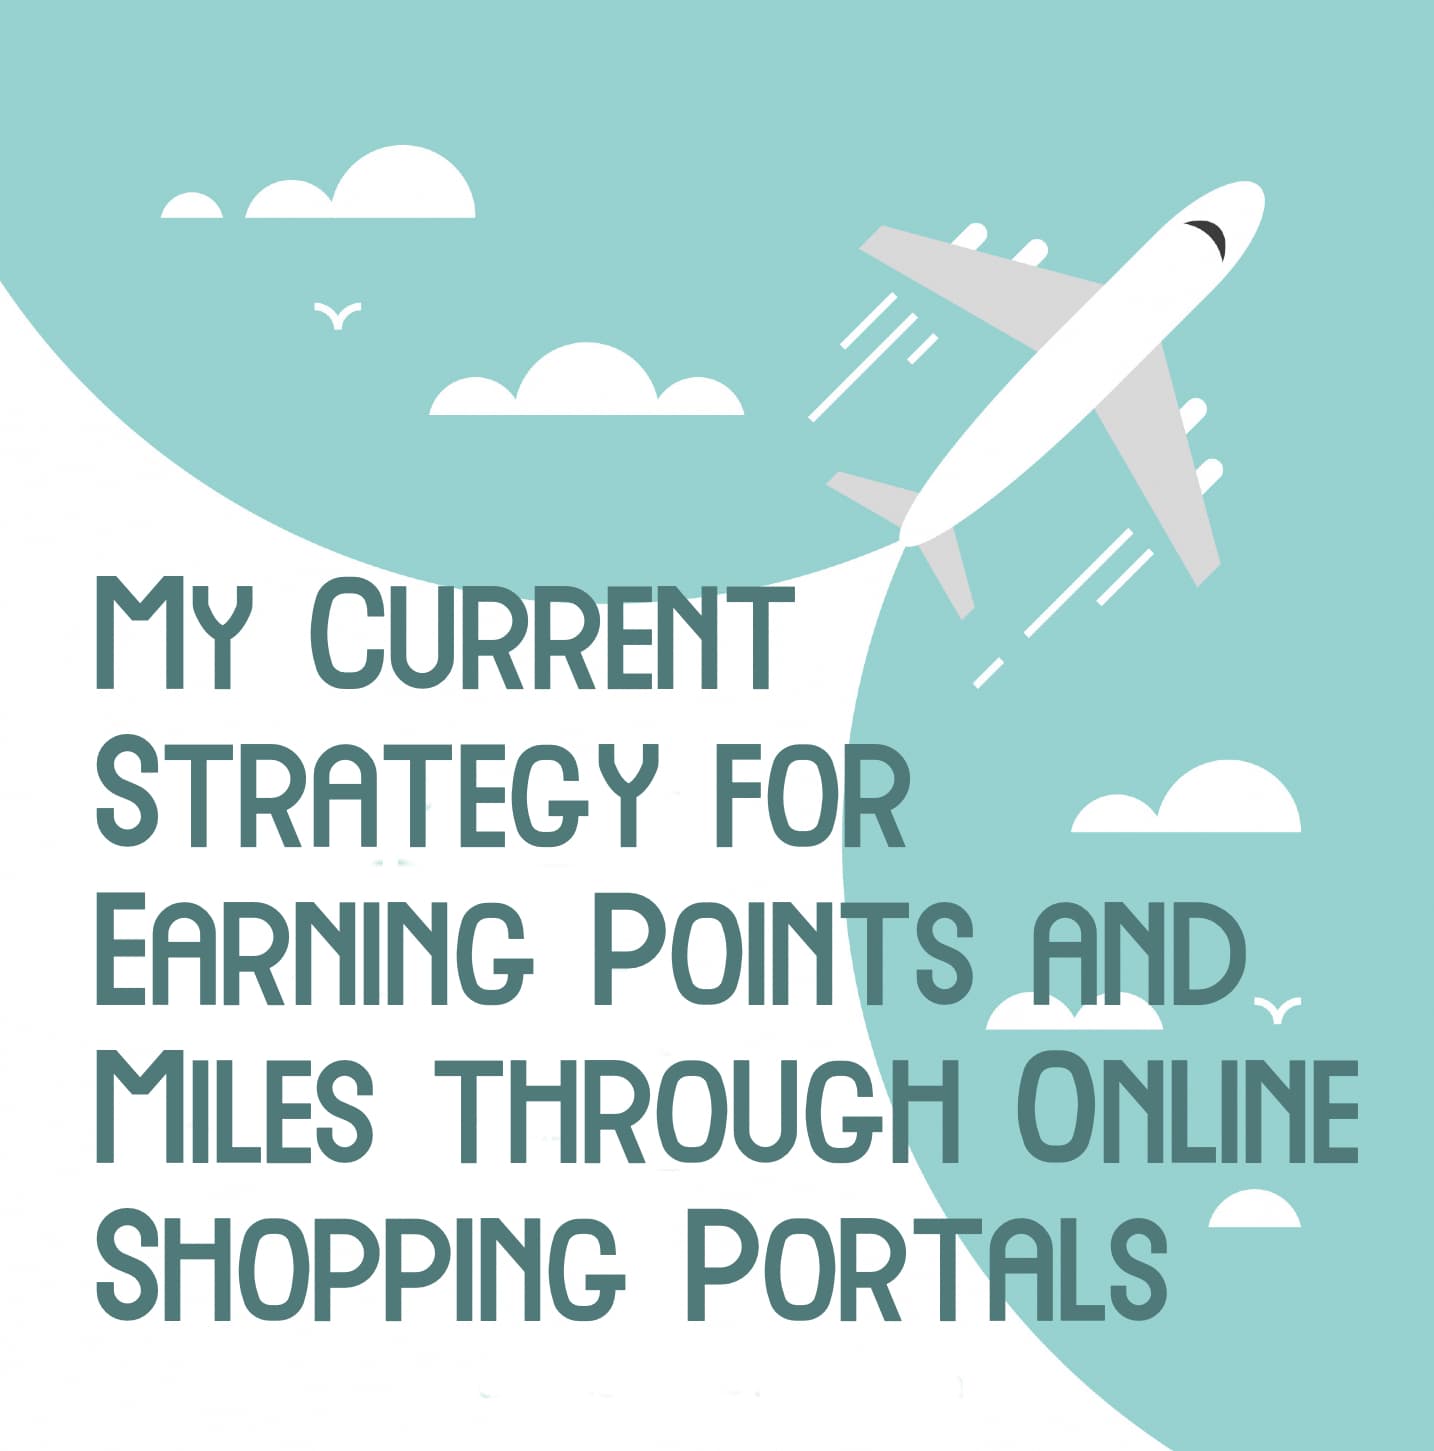 My Current Strategy for Earning Points and Miles through Online Shopping Portals